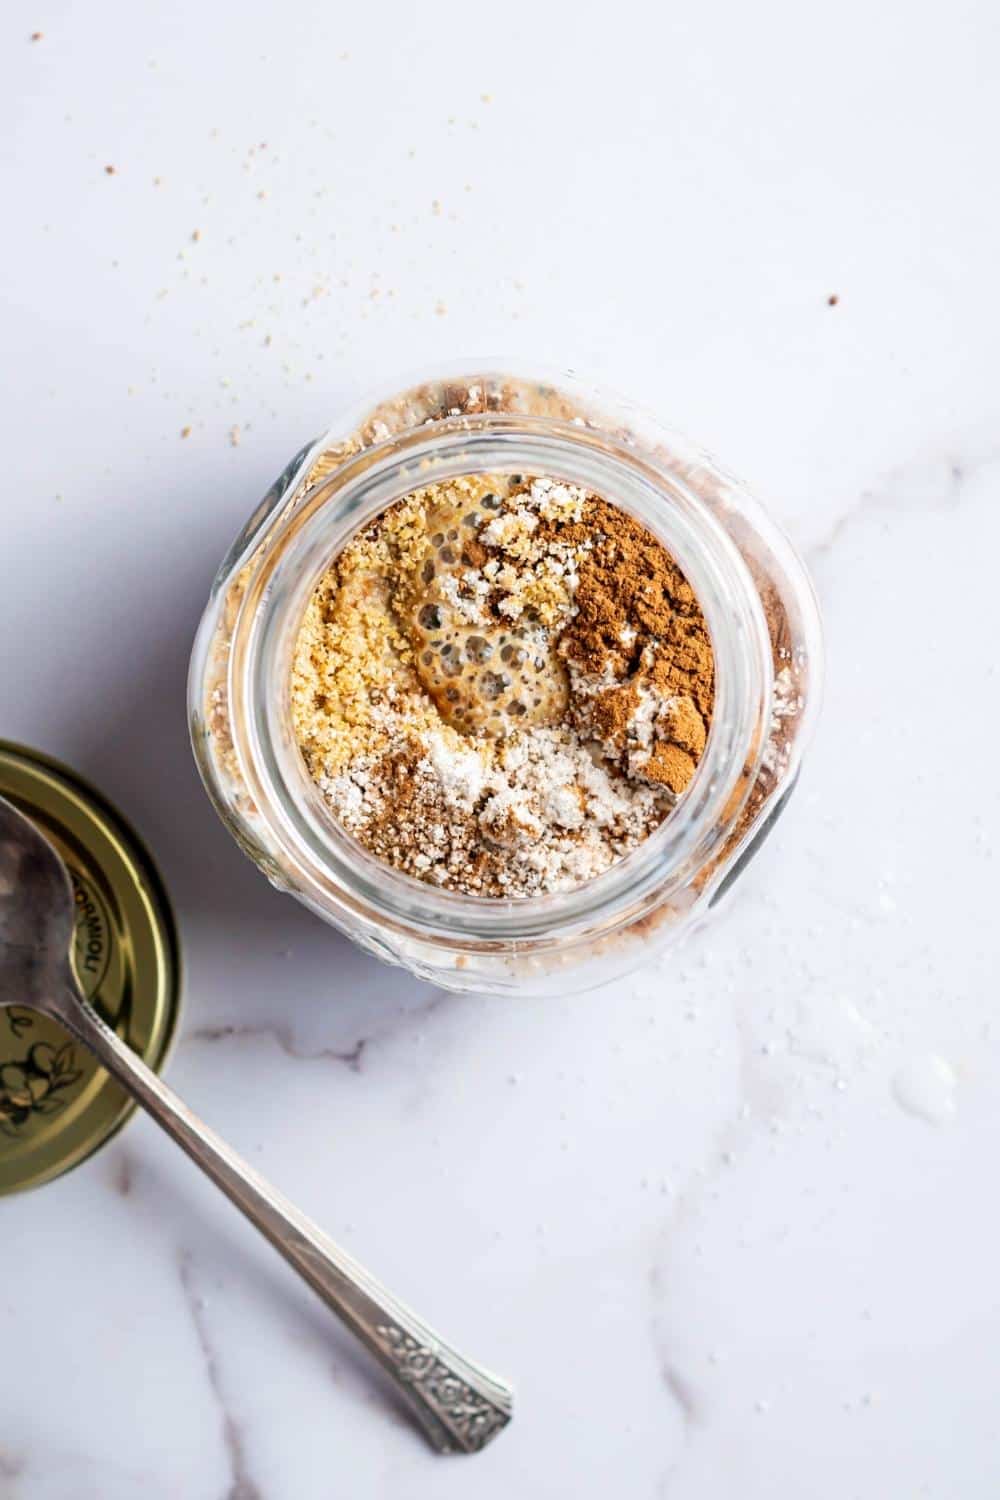 Cinnamon, flaxseed, Chia seeds, almond milk, almond flour, coconut flour, and confectioner erythritol all in a glass jar.